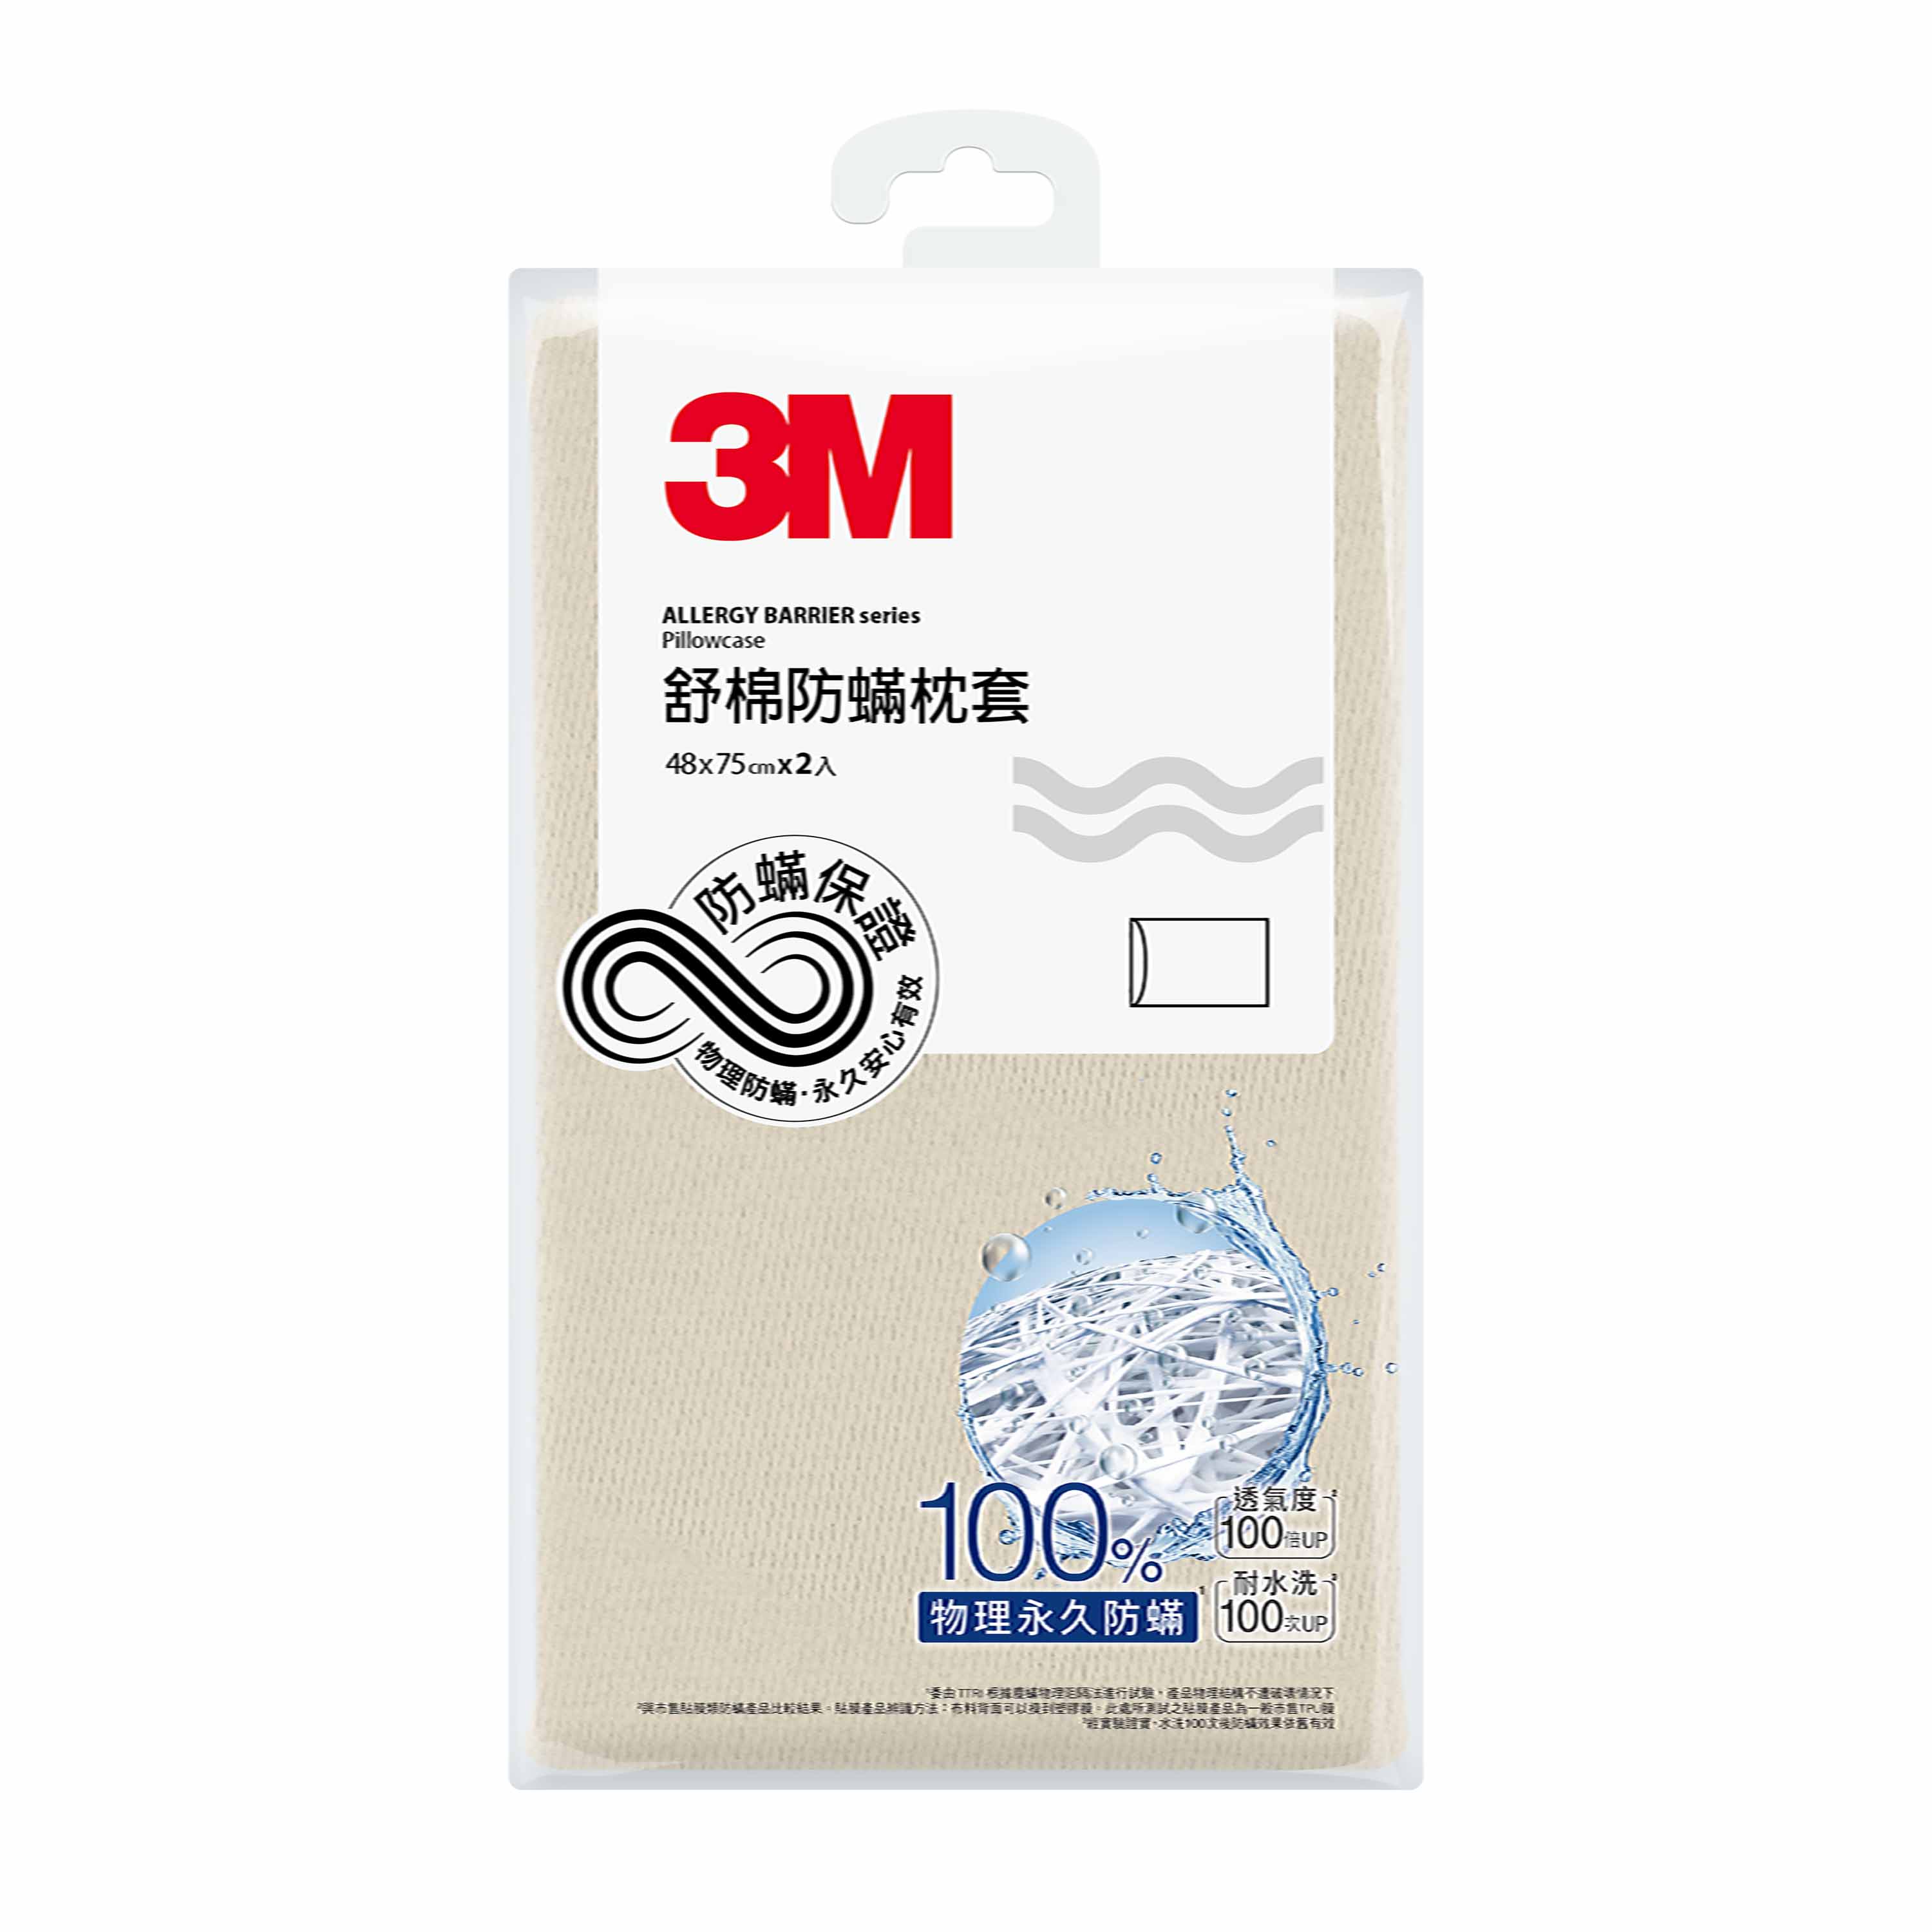 3M AB Cover-Pillowcases, , large